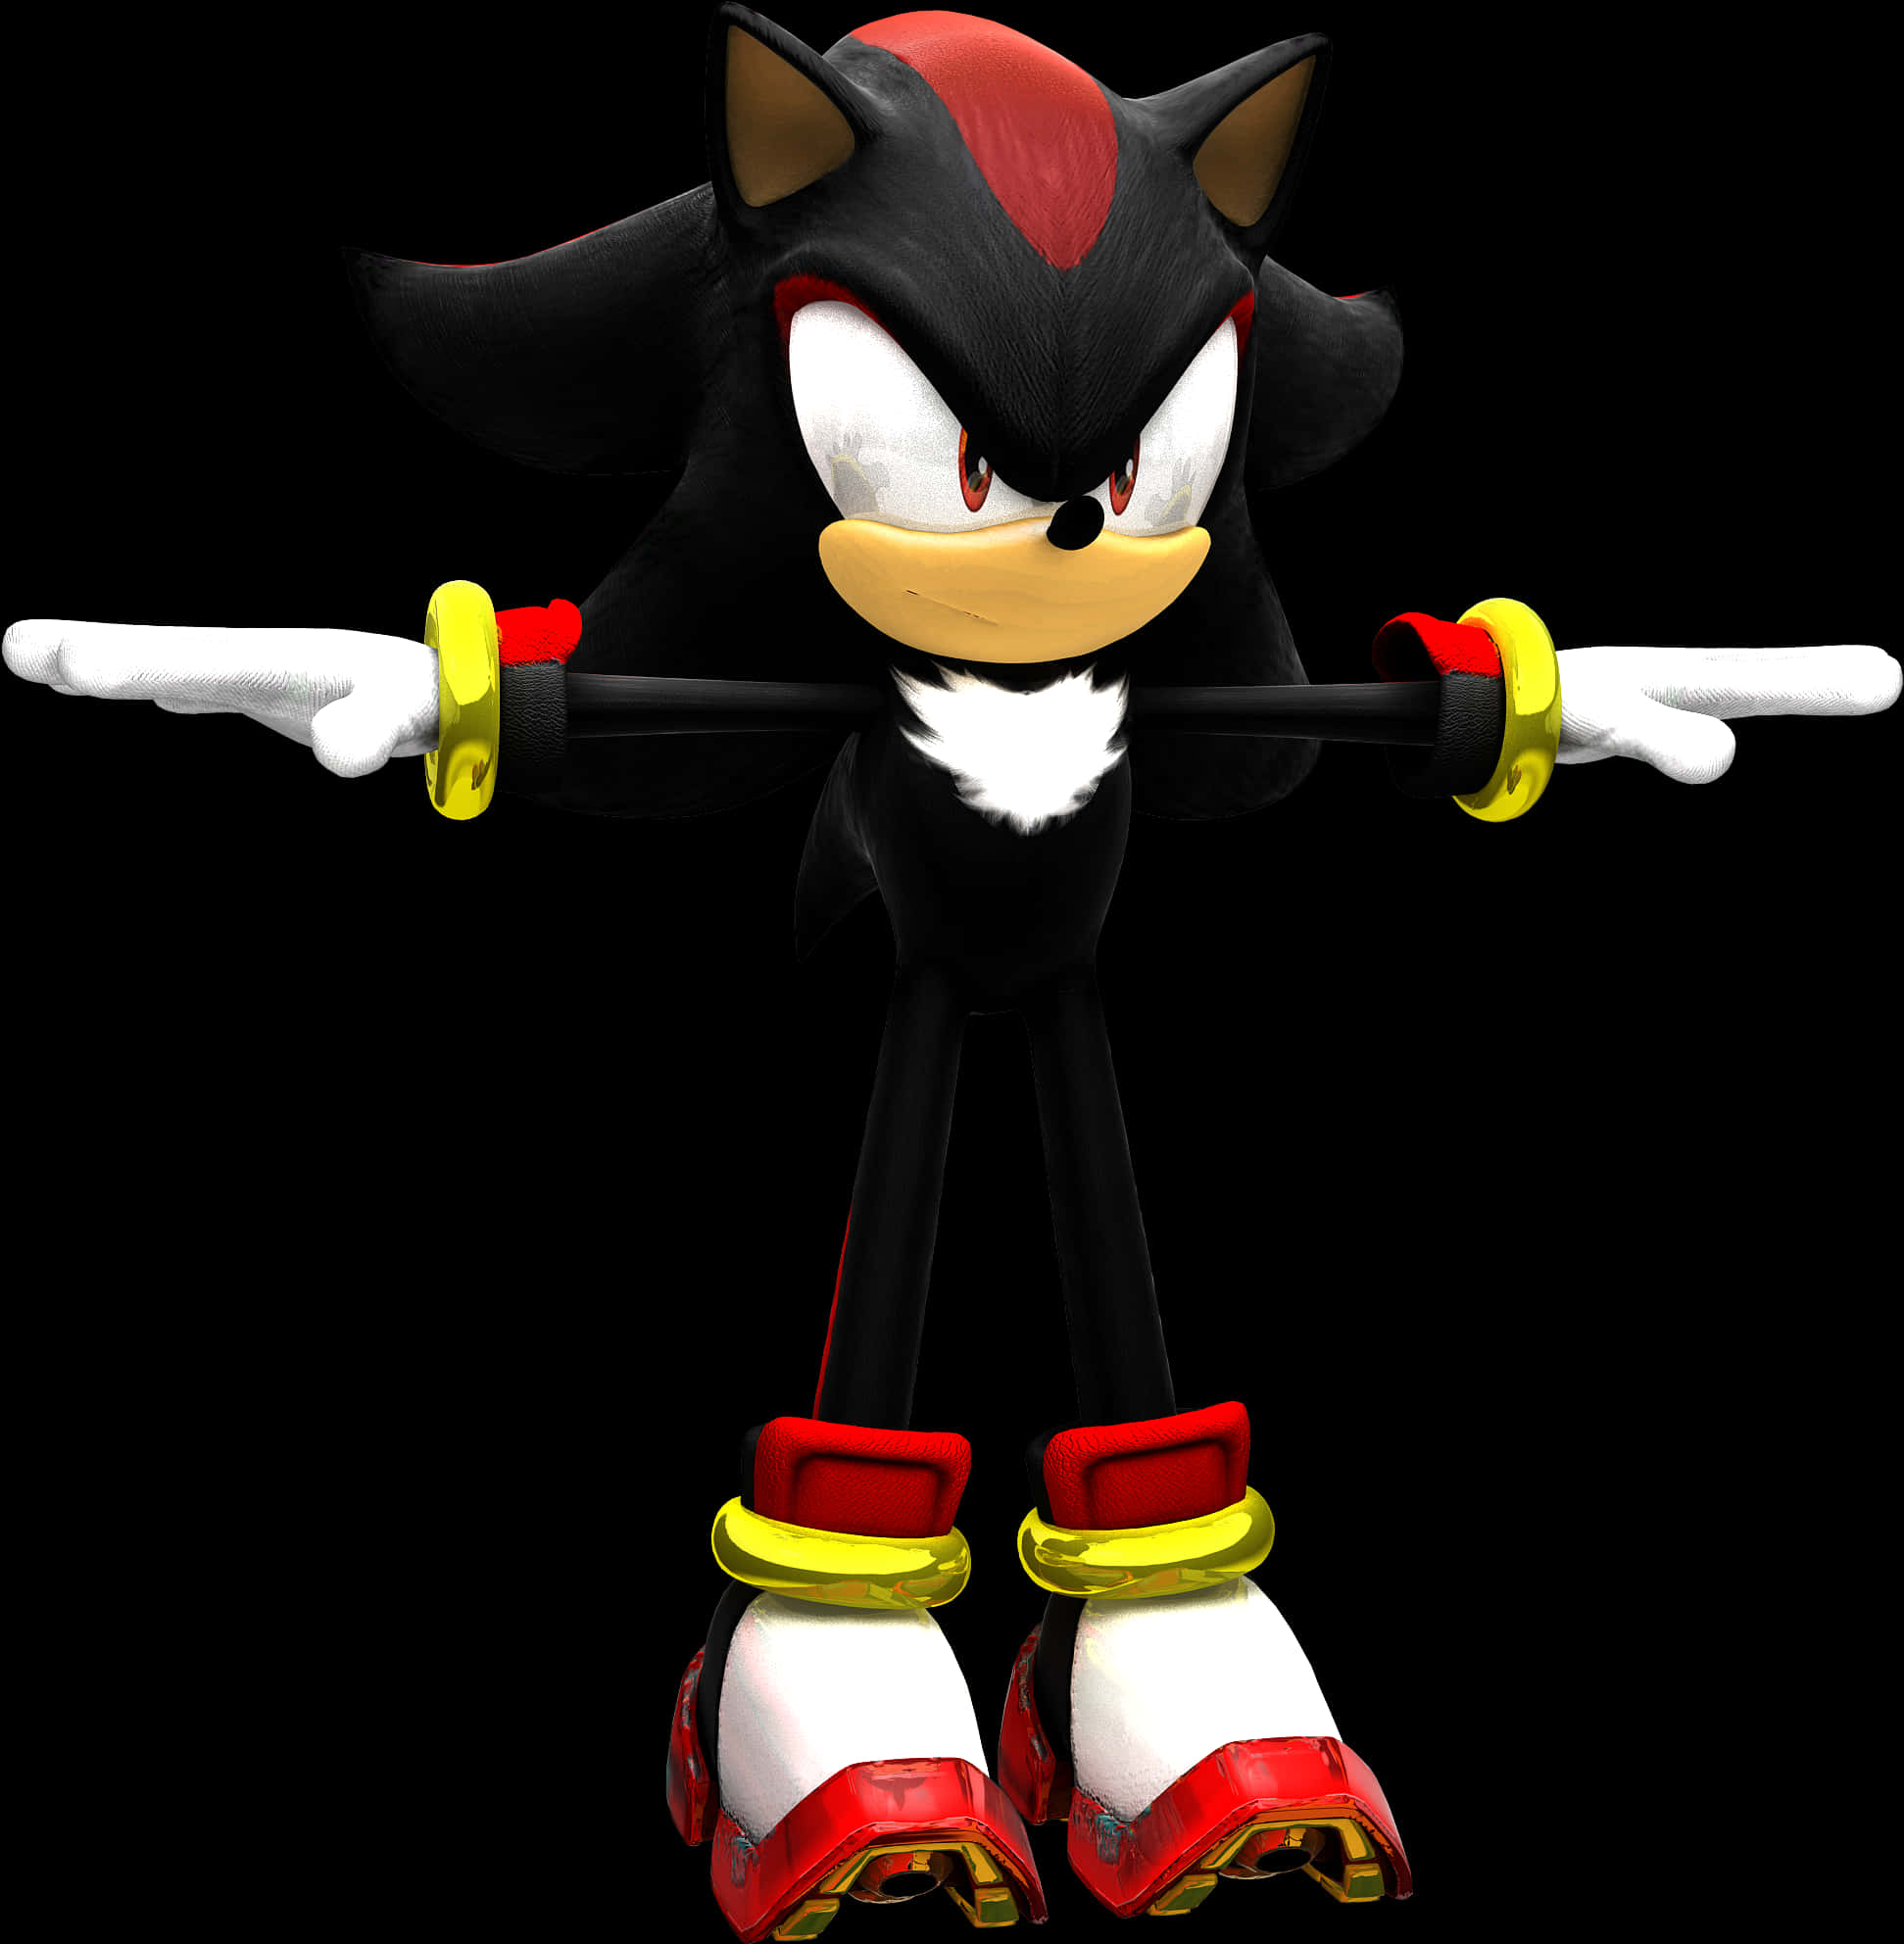 A Cartoon Character Of A Black And Red Hedgehog